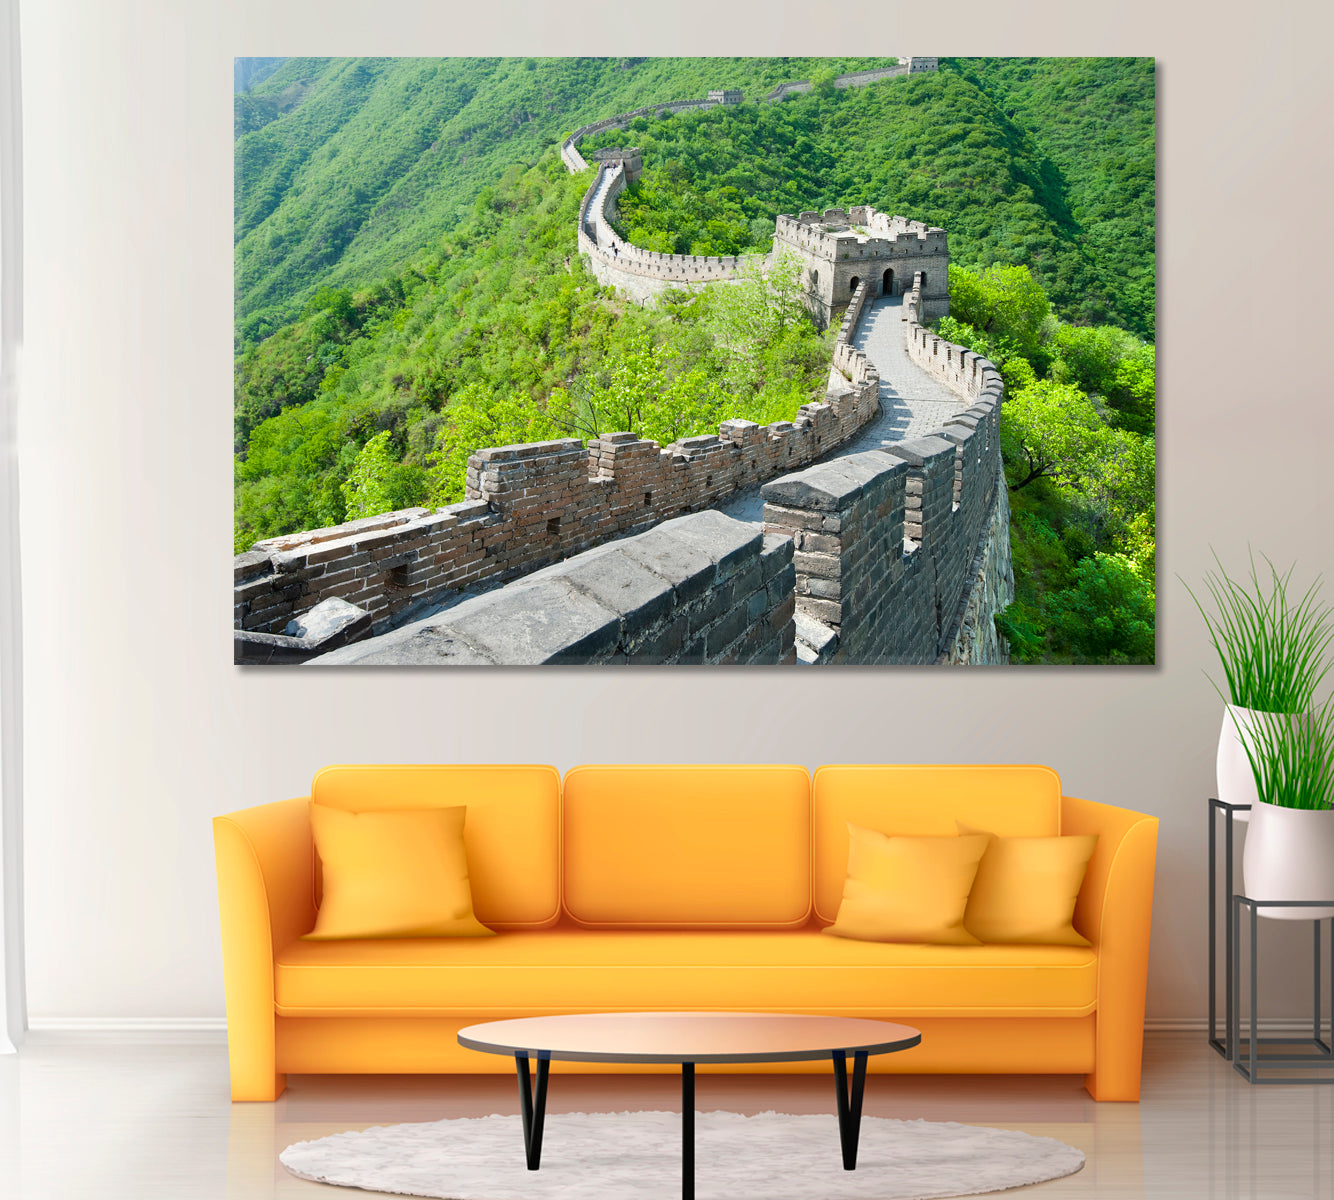 Great Wall of China Mutianyu Beijing Canvas Print ArtLexy 1 Panel 24"x16" inches 